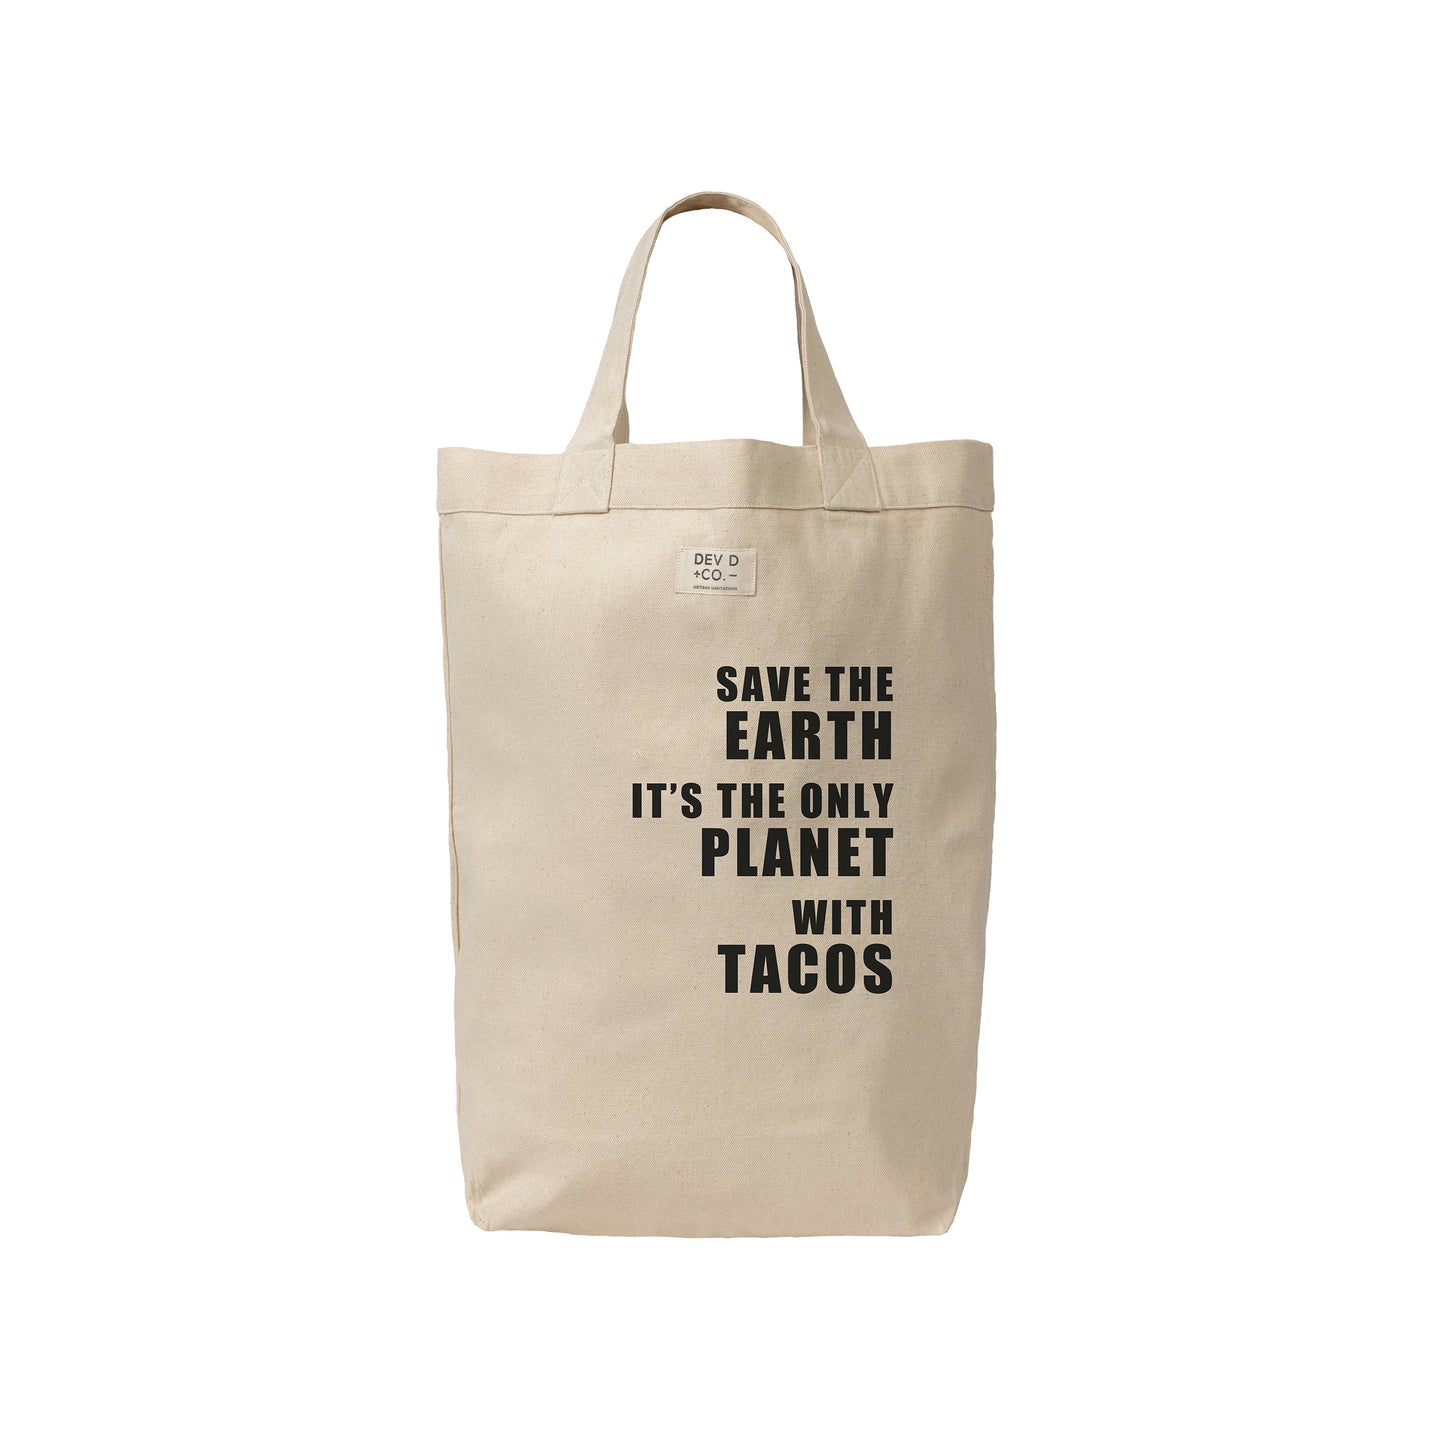 Save The Earth - Canvas Tote Bag - Market Tote